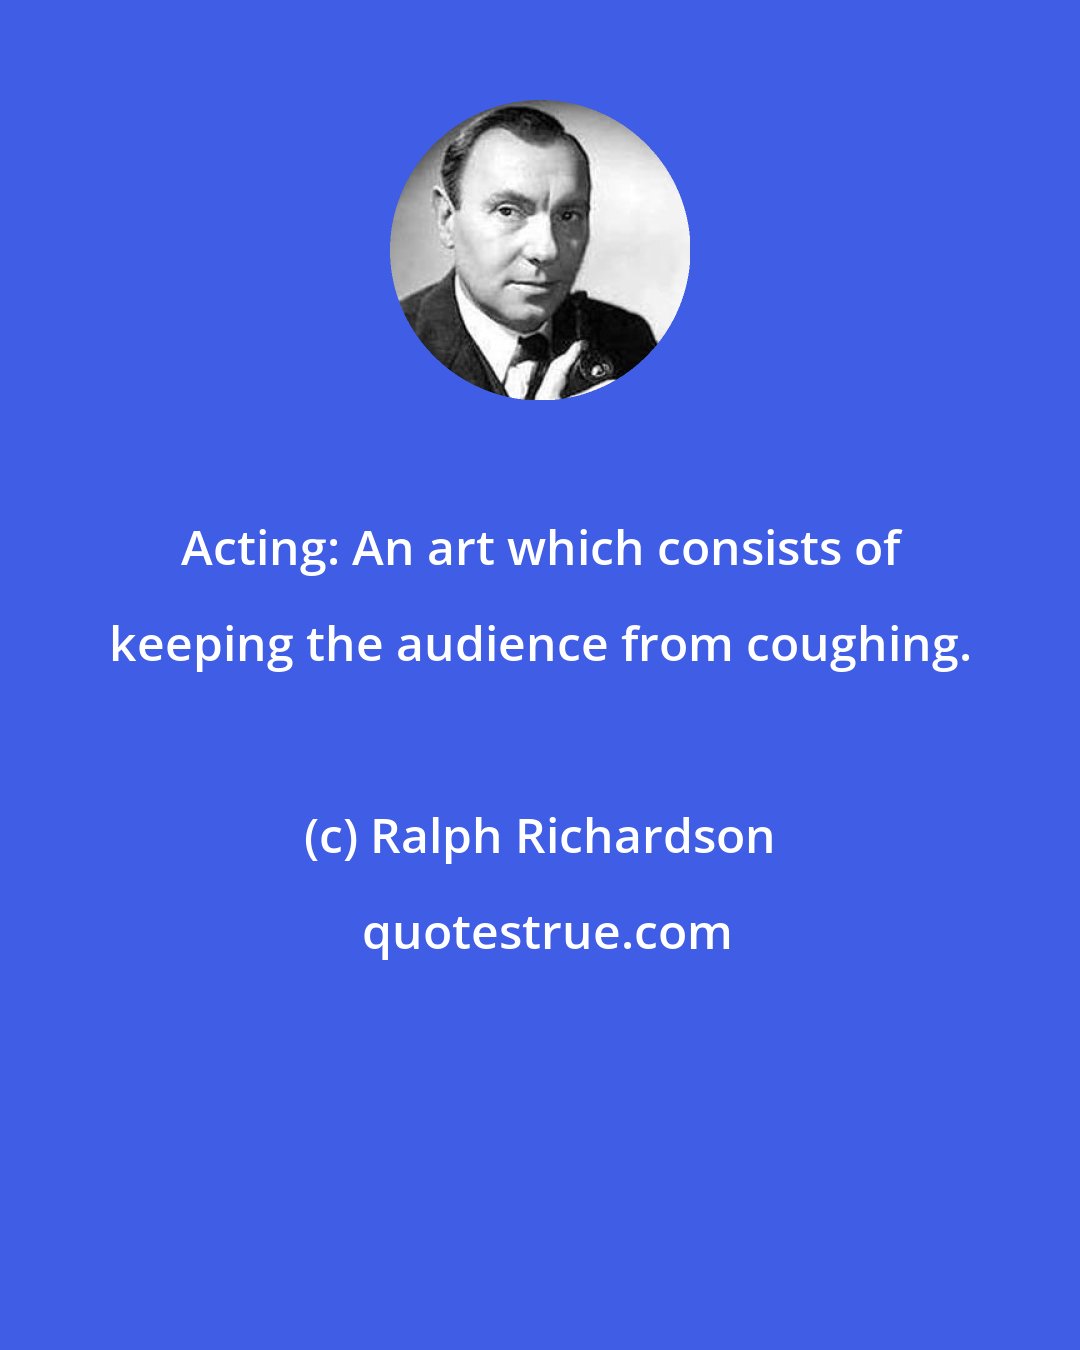 Ralph Richardson: Acting: An art which consists of keeping the audience from coughing.